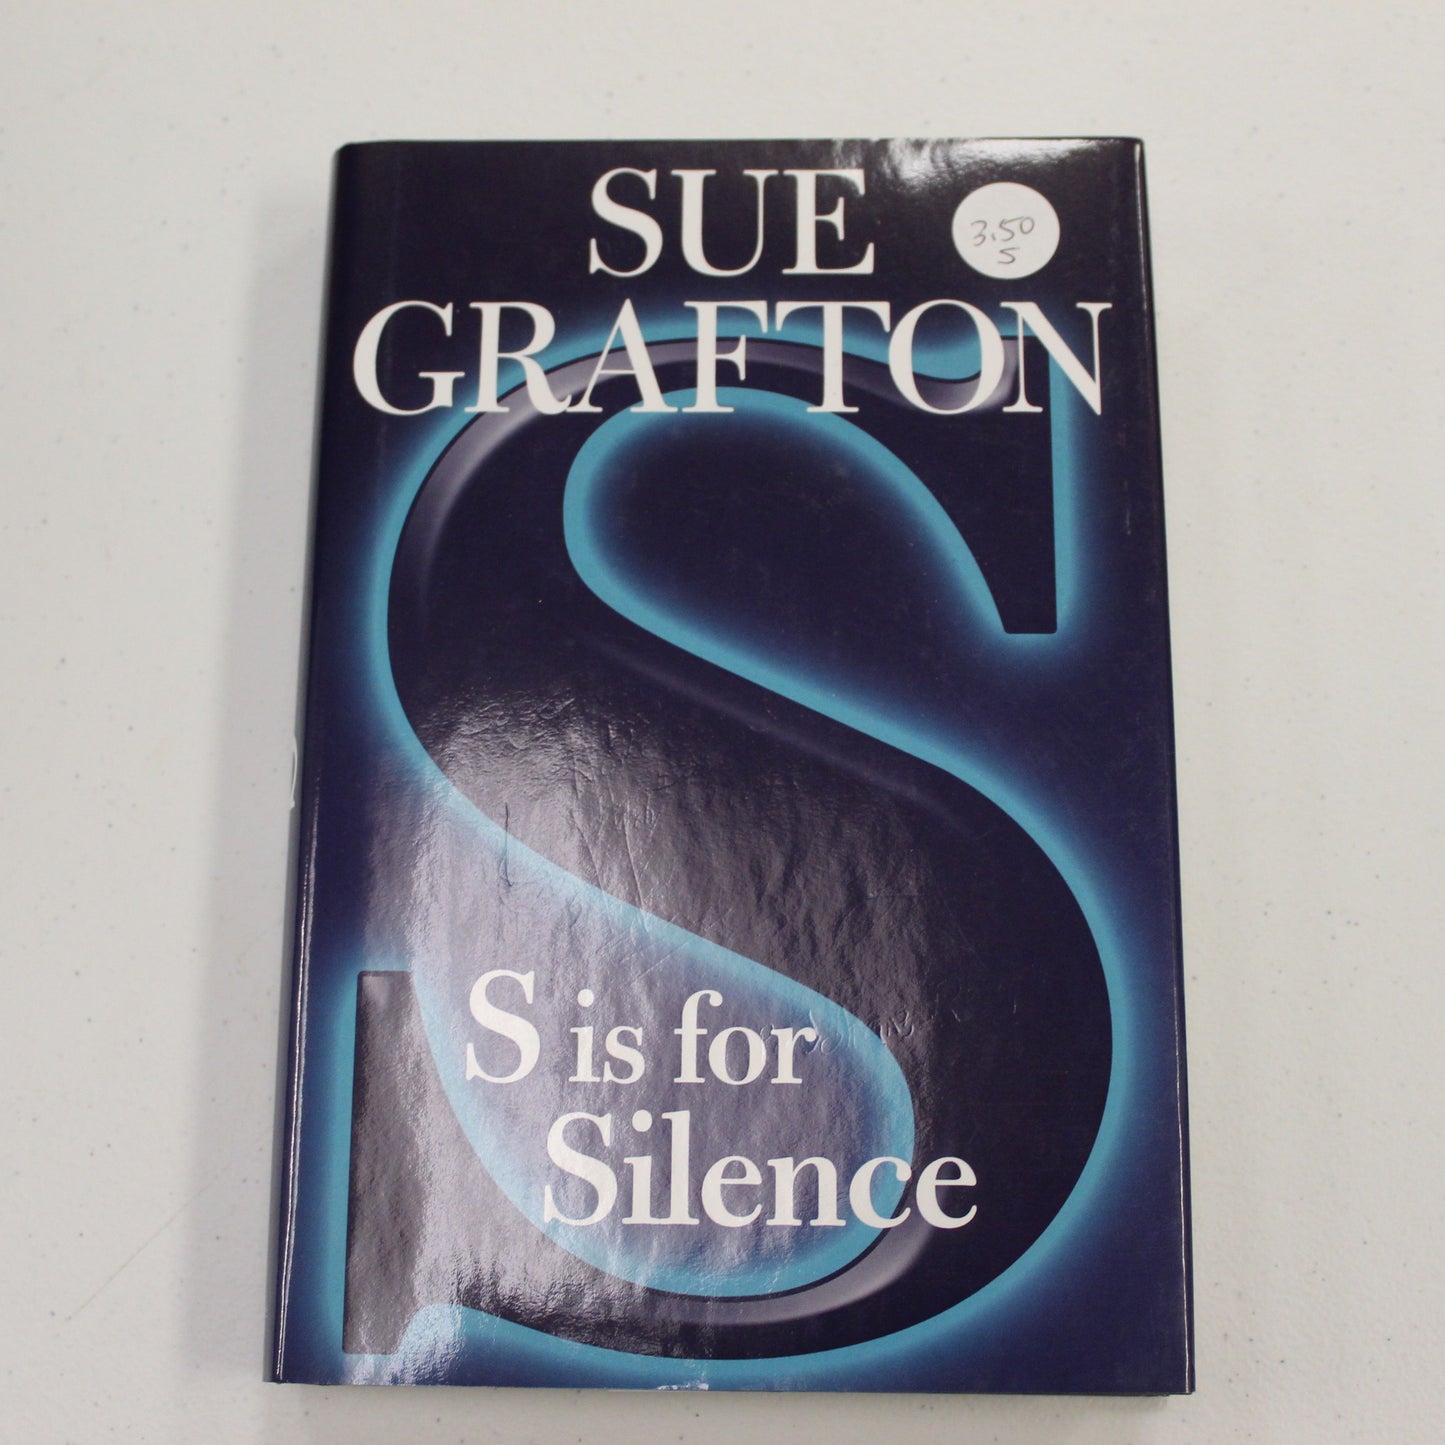 S IS FOR SILENCE